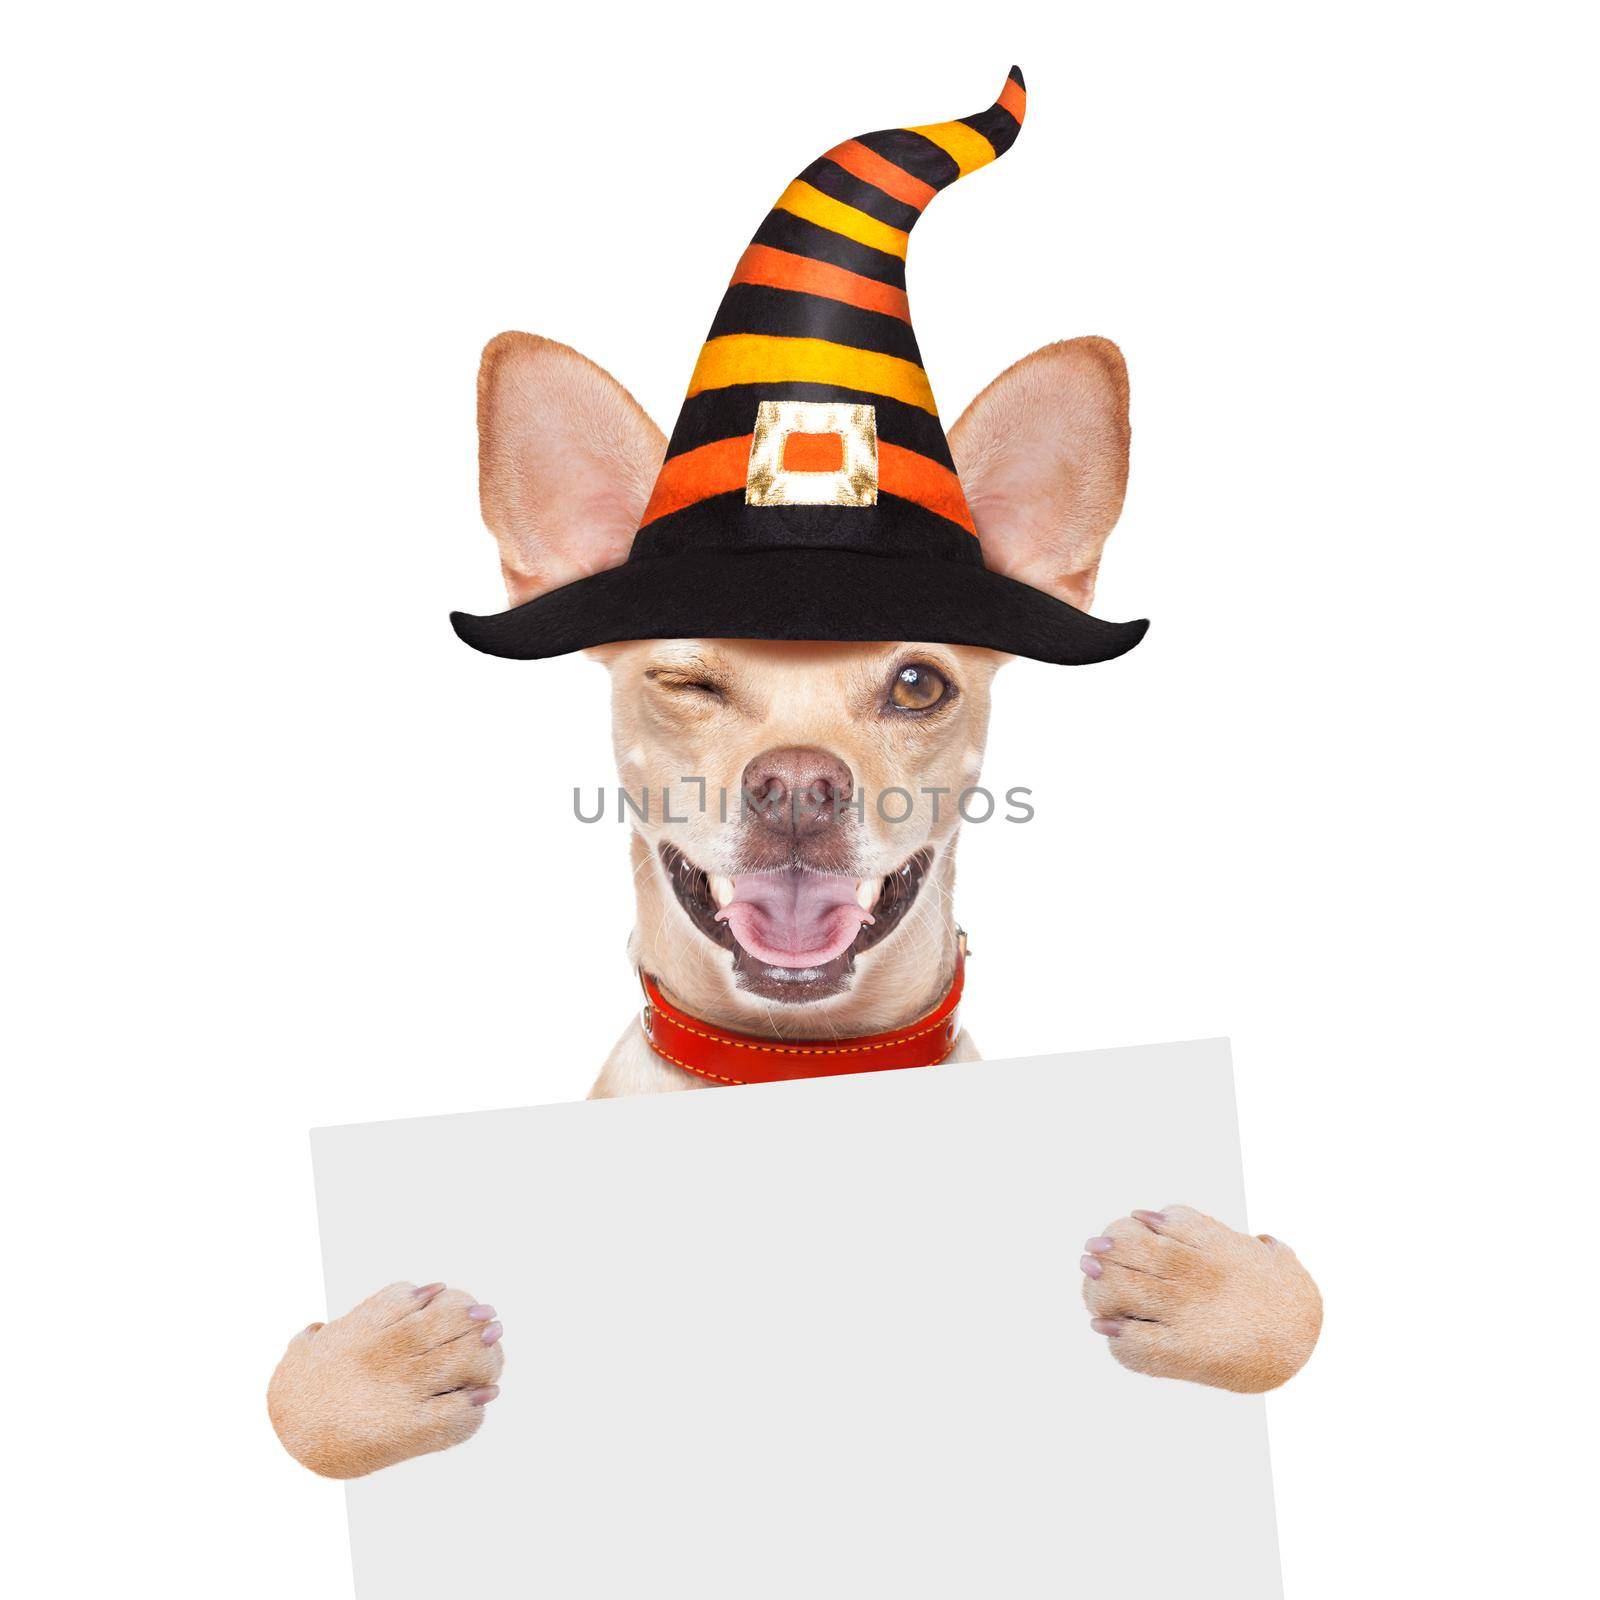 halloween devil,chihuahua dog scared and frightened, isolated on white background, wearing a witch hat, behind white blank banner or placard poster